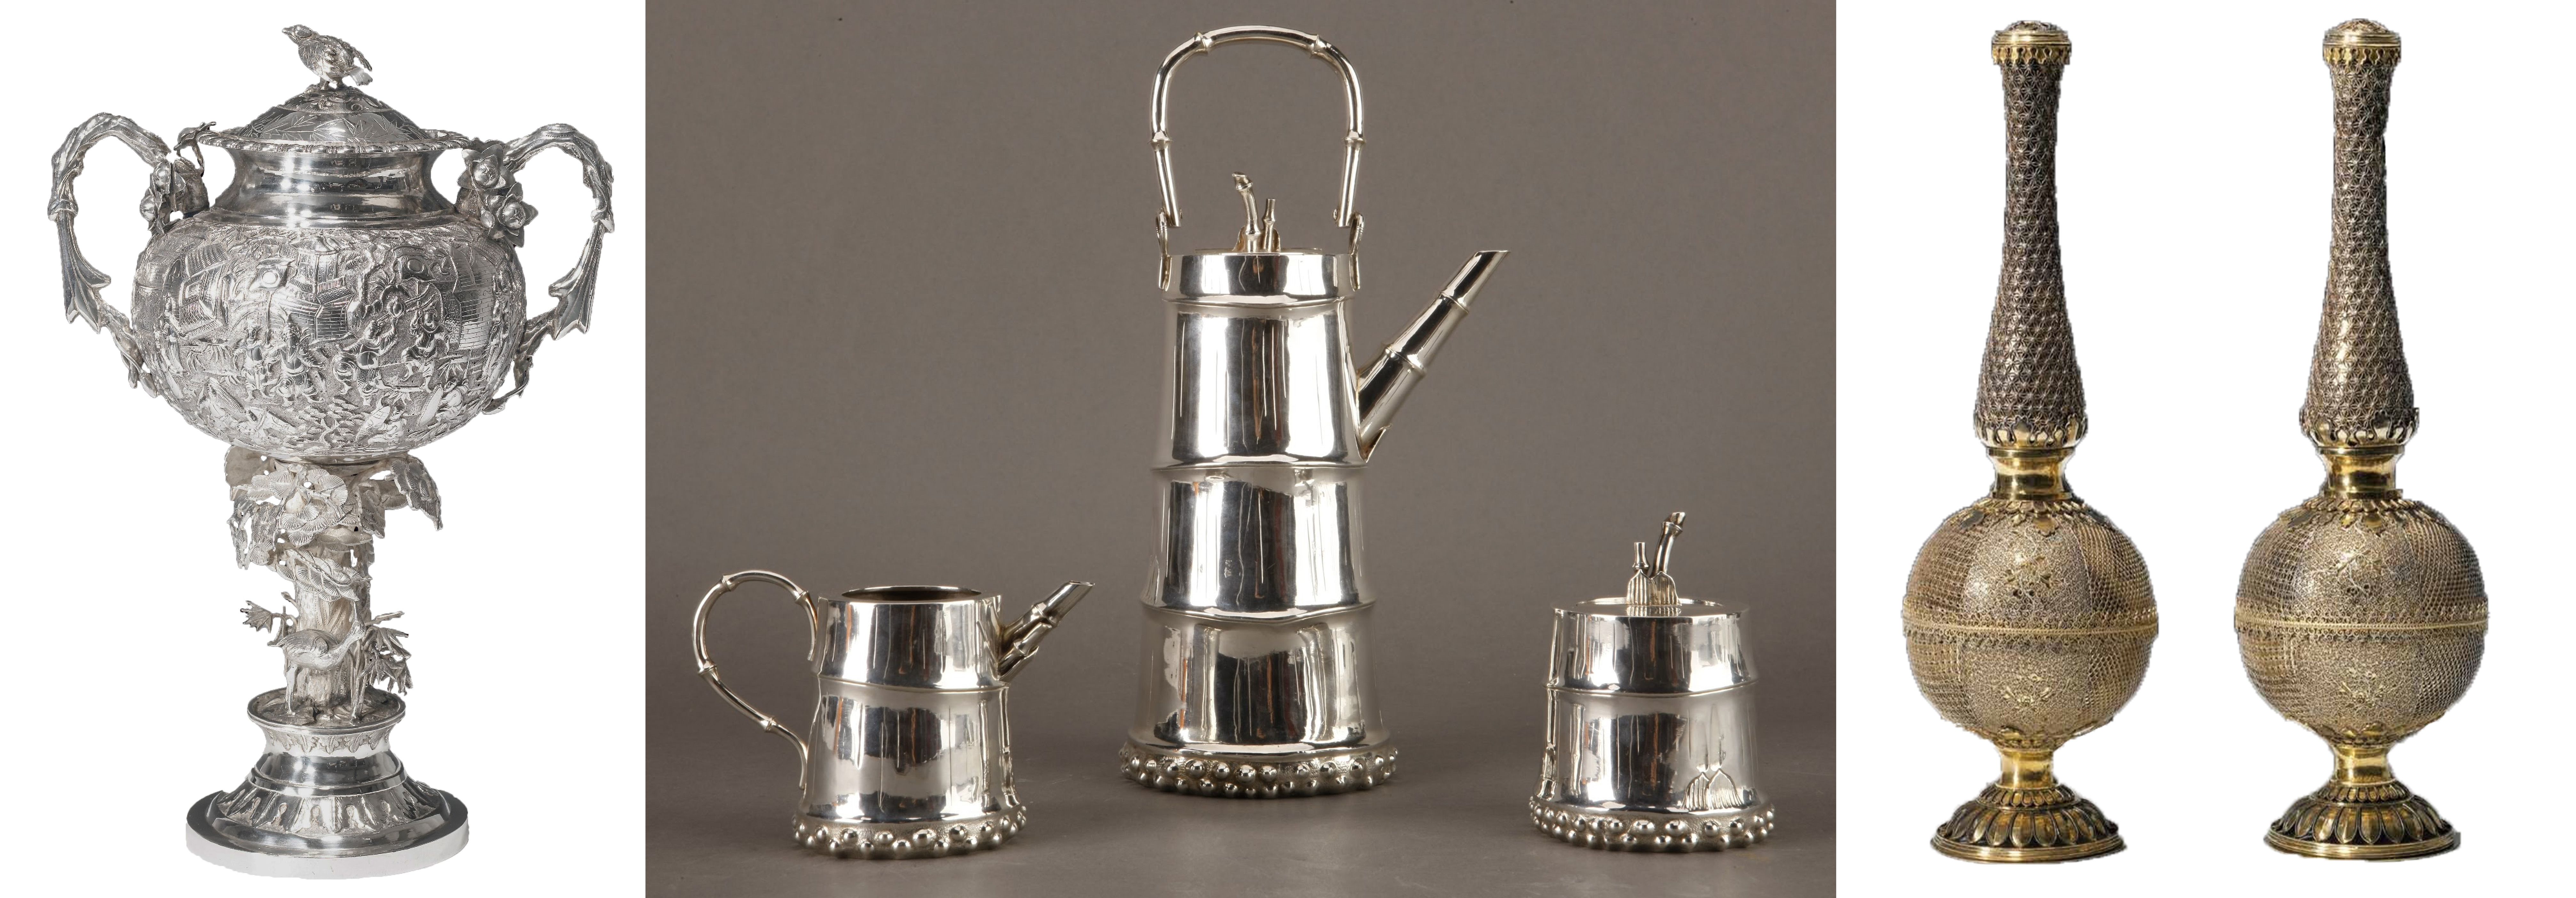 Chinese export silver. Left: standing cup with repose figures in landscape design and stand of pine tree and crane form, Cumshing, Canton, 19th century, silver 24 x 16.5 x 11.5 cm (Hong Kong Maritime Museum); center: set of bamboo-shaped tea service, 1900–1910, silver (Hong Kong Maritime Museum); right: rosewater sprinkler with floral pattern, late 18th century, filigree silver, 16 x 9 cm (Hong Kong Maritime Museum)